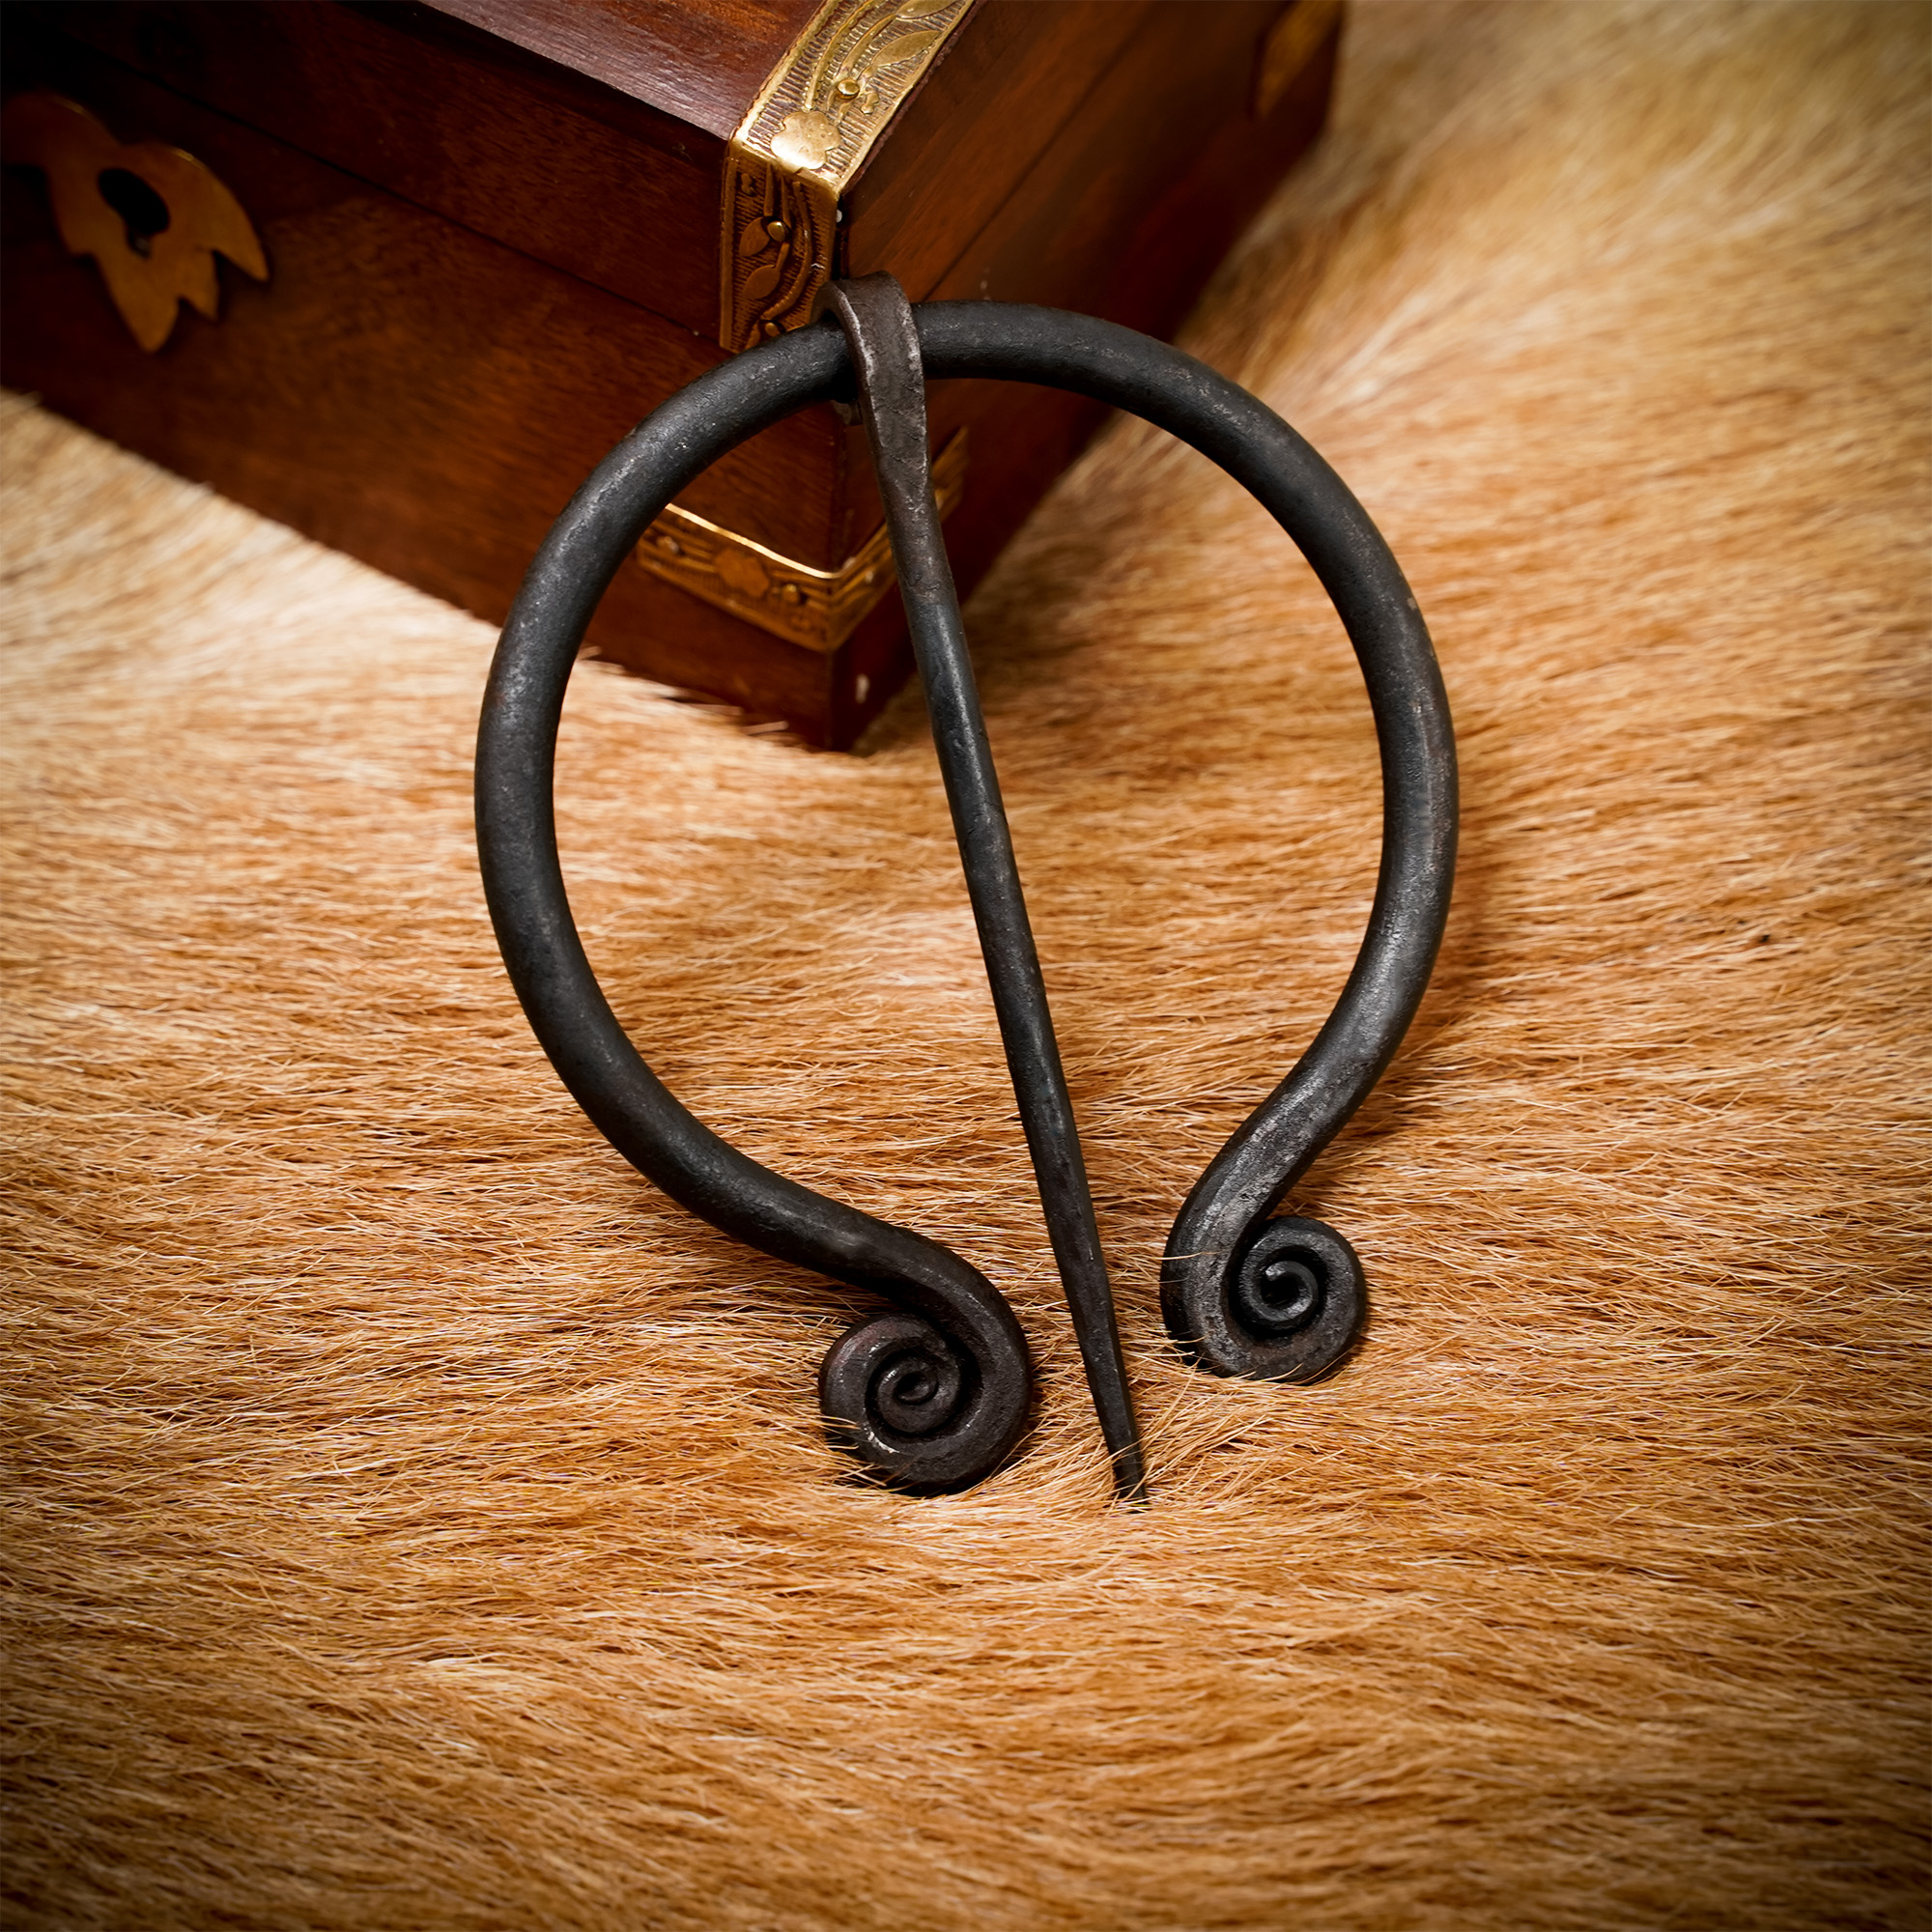 Hand Forged Iron Cloak Clasp by Lord of Battles